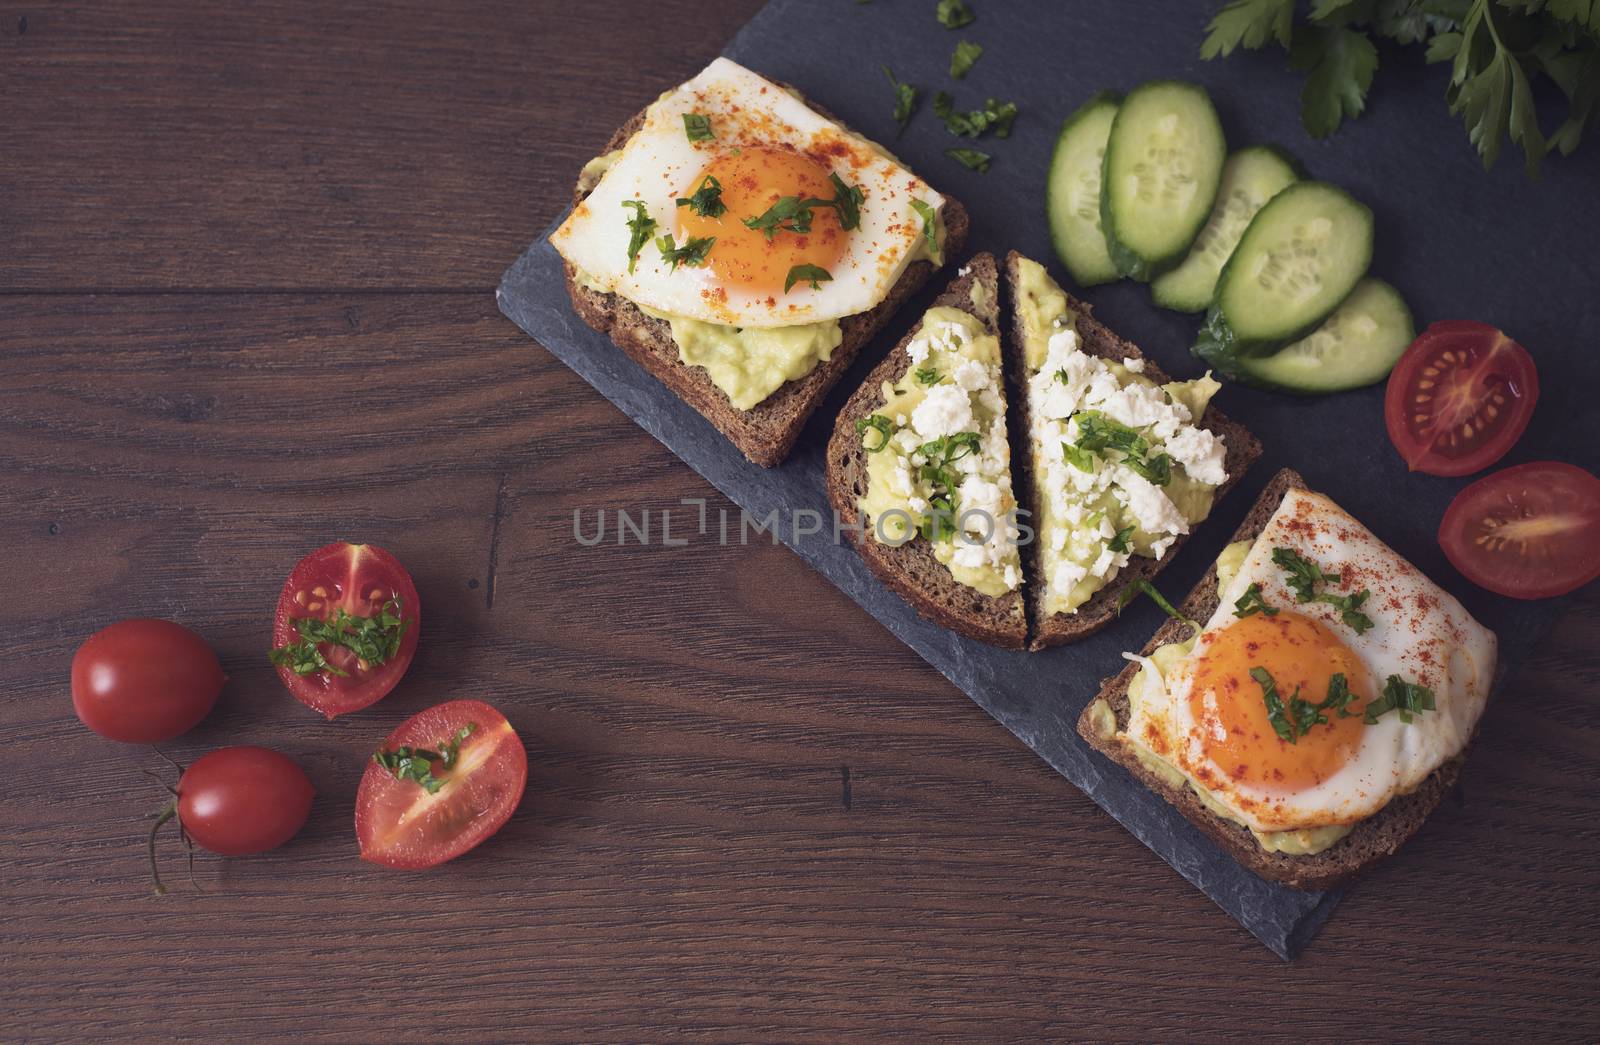 Avocado Toast. Healthy Breakfast. Top View. Homemade Sandwich With Avocado And Fried Eggs, Cherry Tomato And Cucumbers On A Wooden Background. Dark Food Photography, Fawn Filter